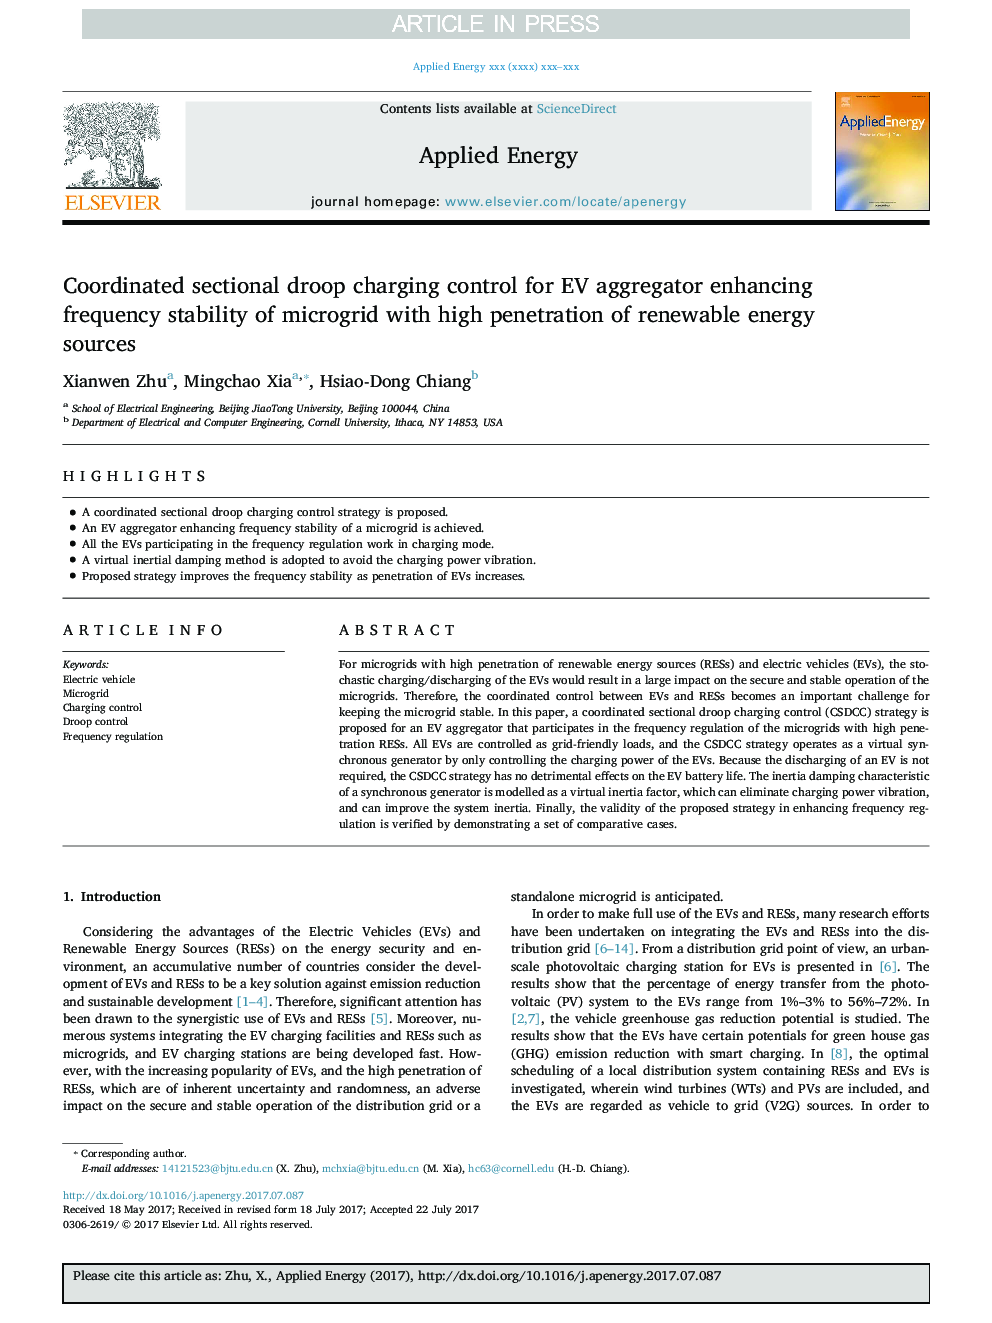 Coordinated sectional droop charging control for EV aggregator enhancing frequency stability of microgrid with high penetration of renewable energy sources